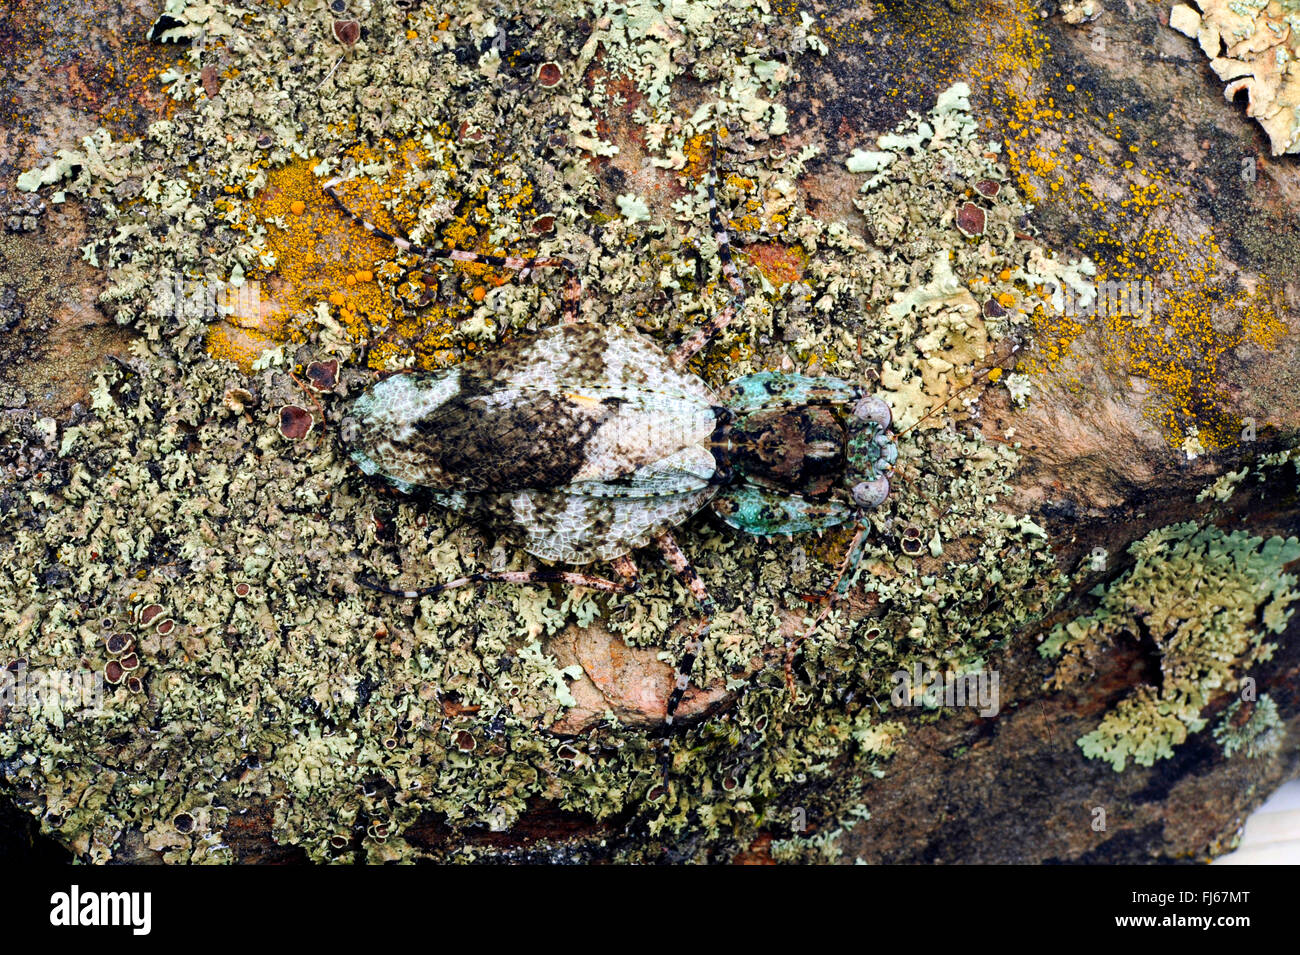 Bark Mantis (Theopompa servillei), well camouflaged on bark covered with lichens Stock Photo